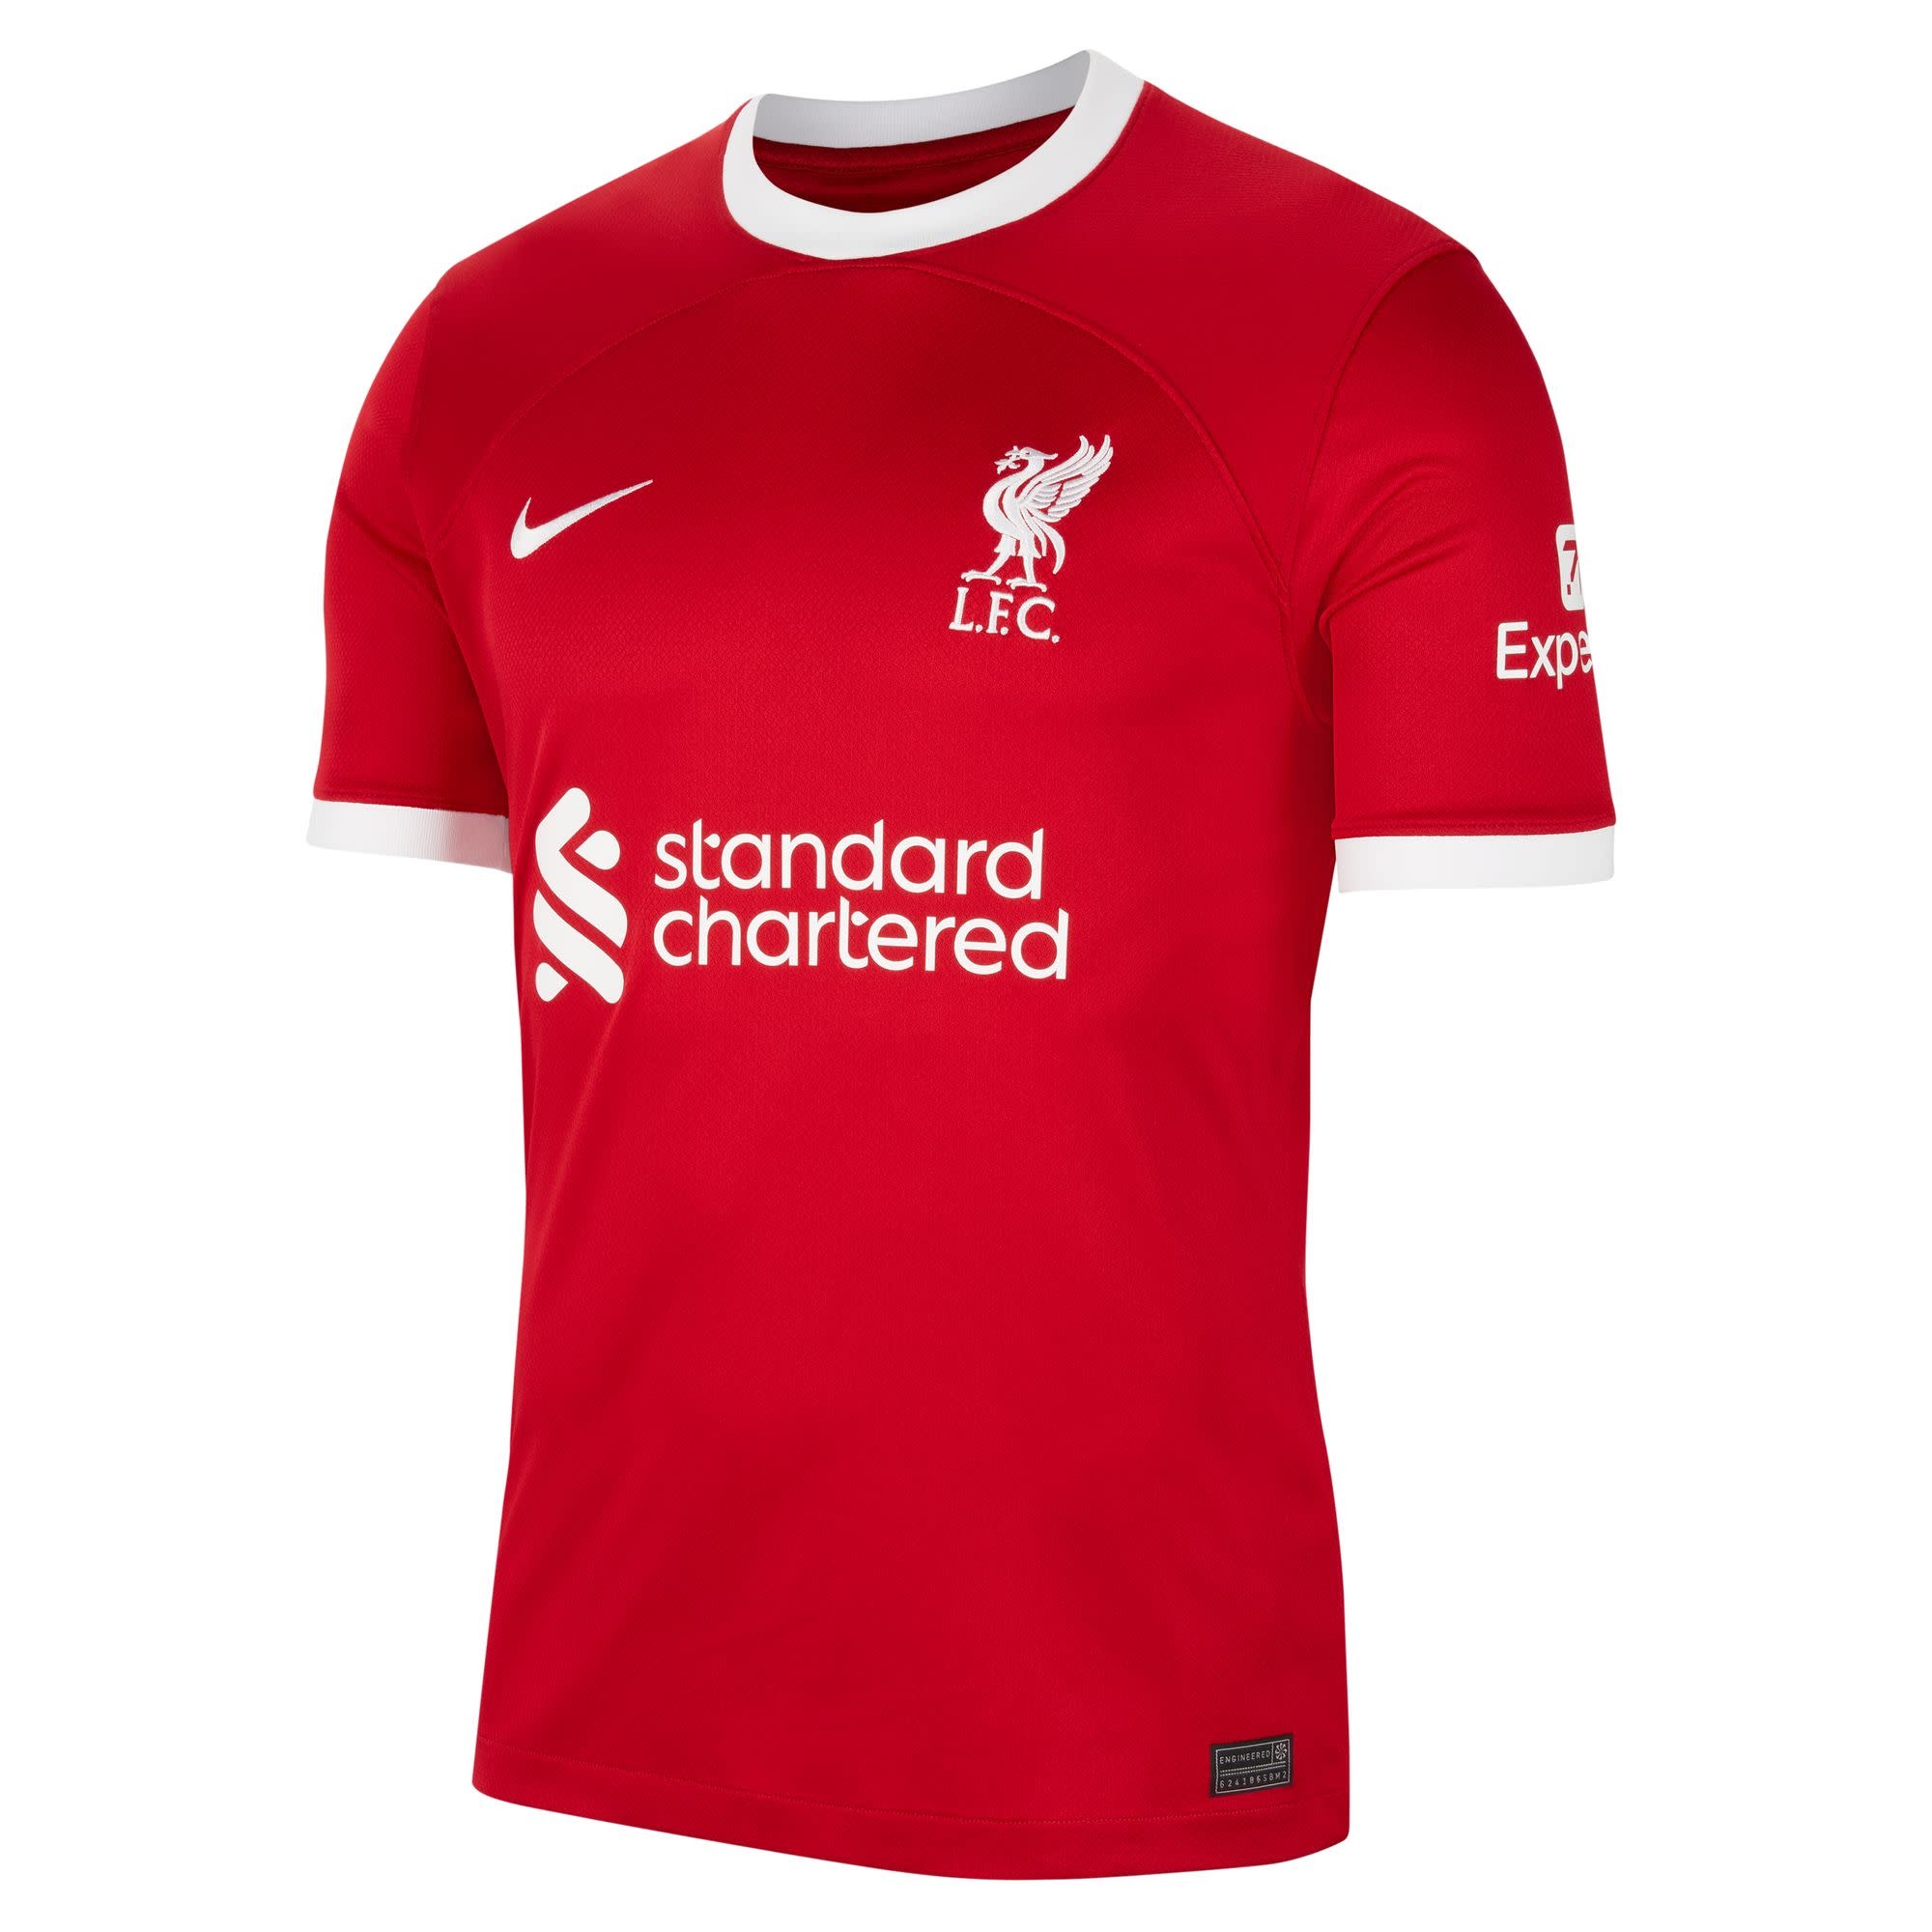 Nike Launch Liverpool 23/24 Home Shirt - SoccerBible